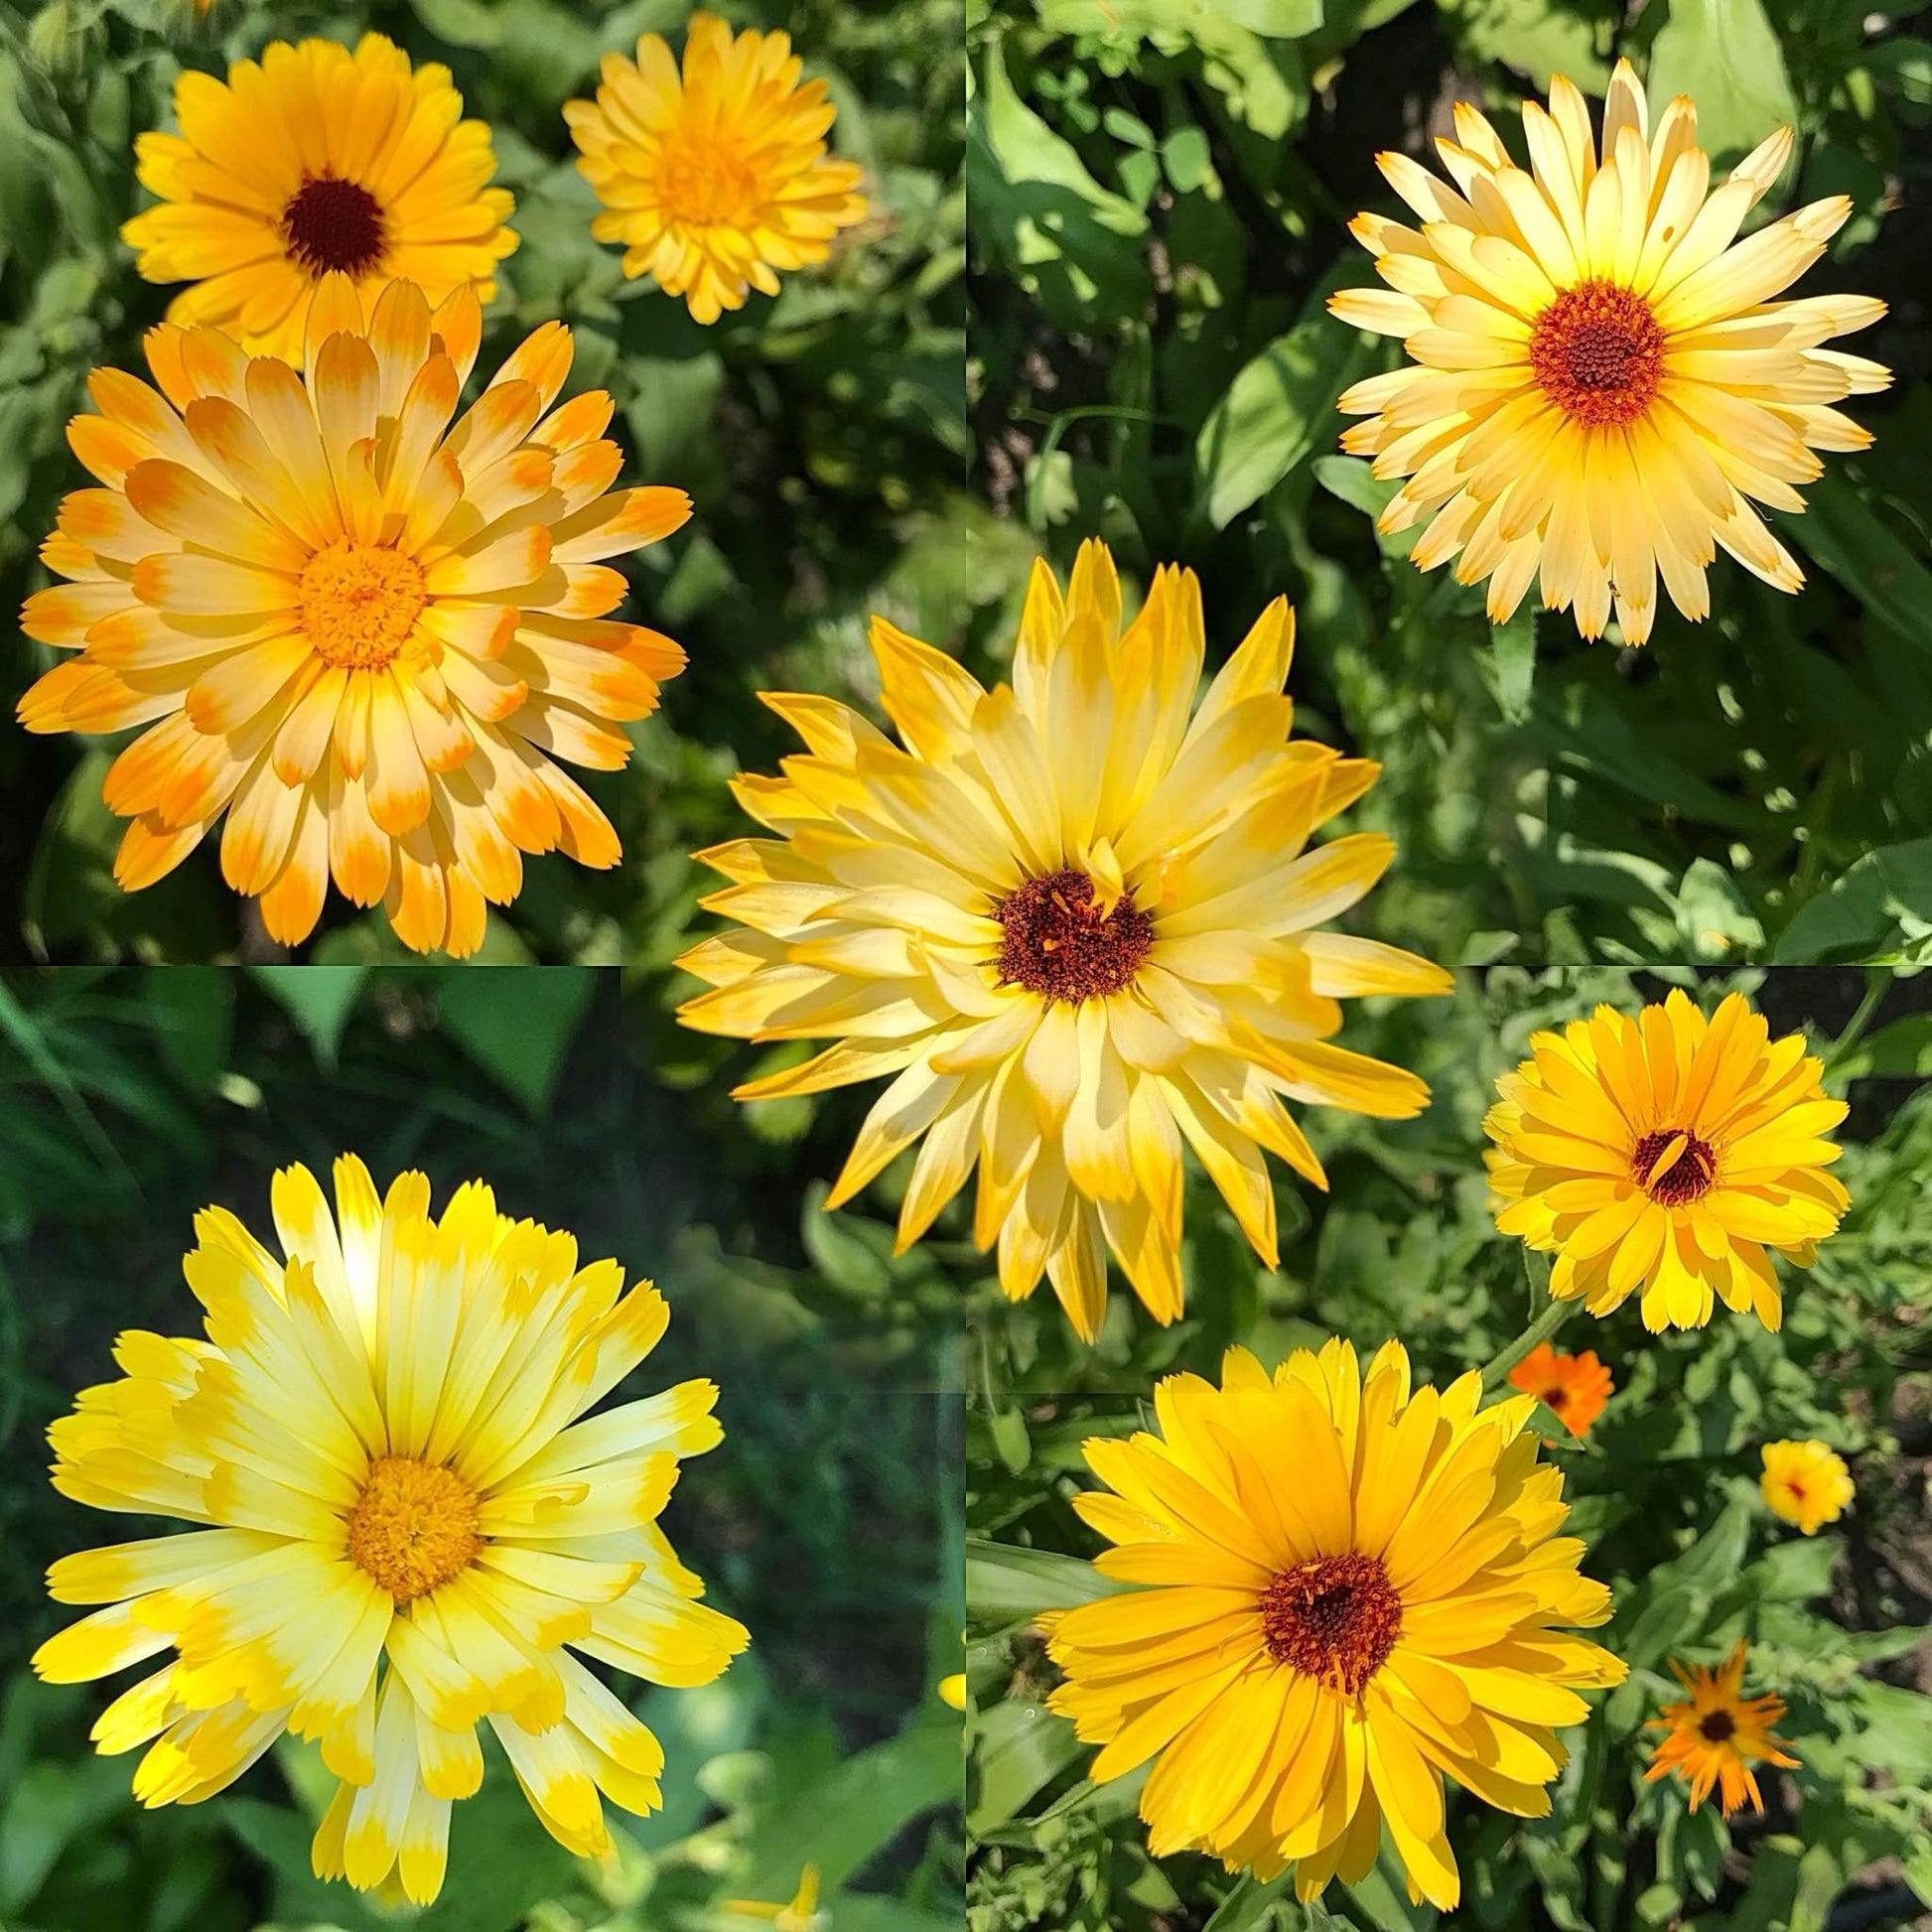 Eight calendula blooms of orange and yellow, some with delicate white highlights.